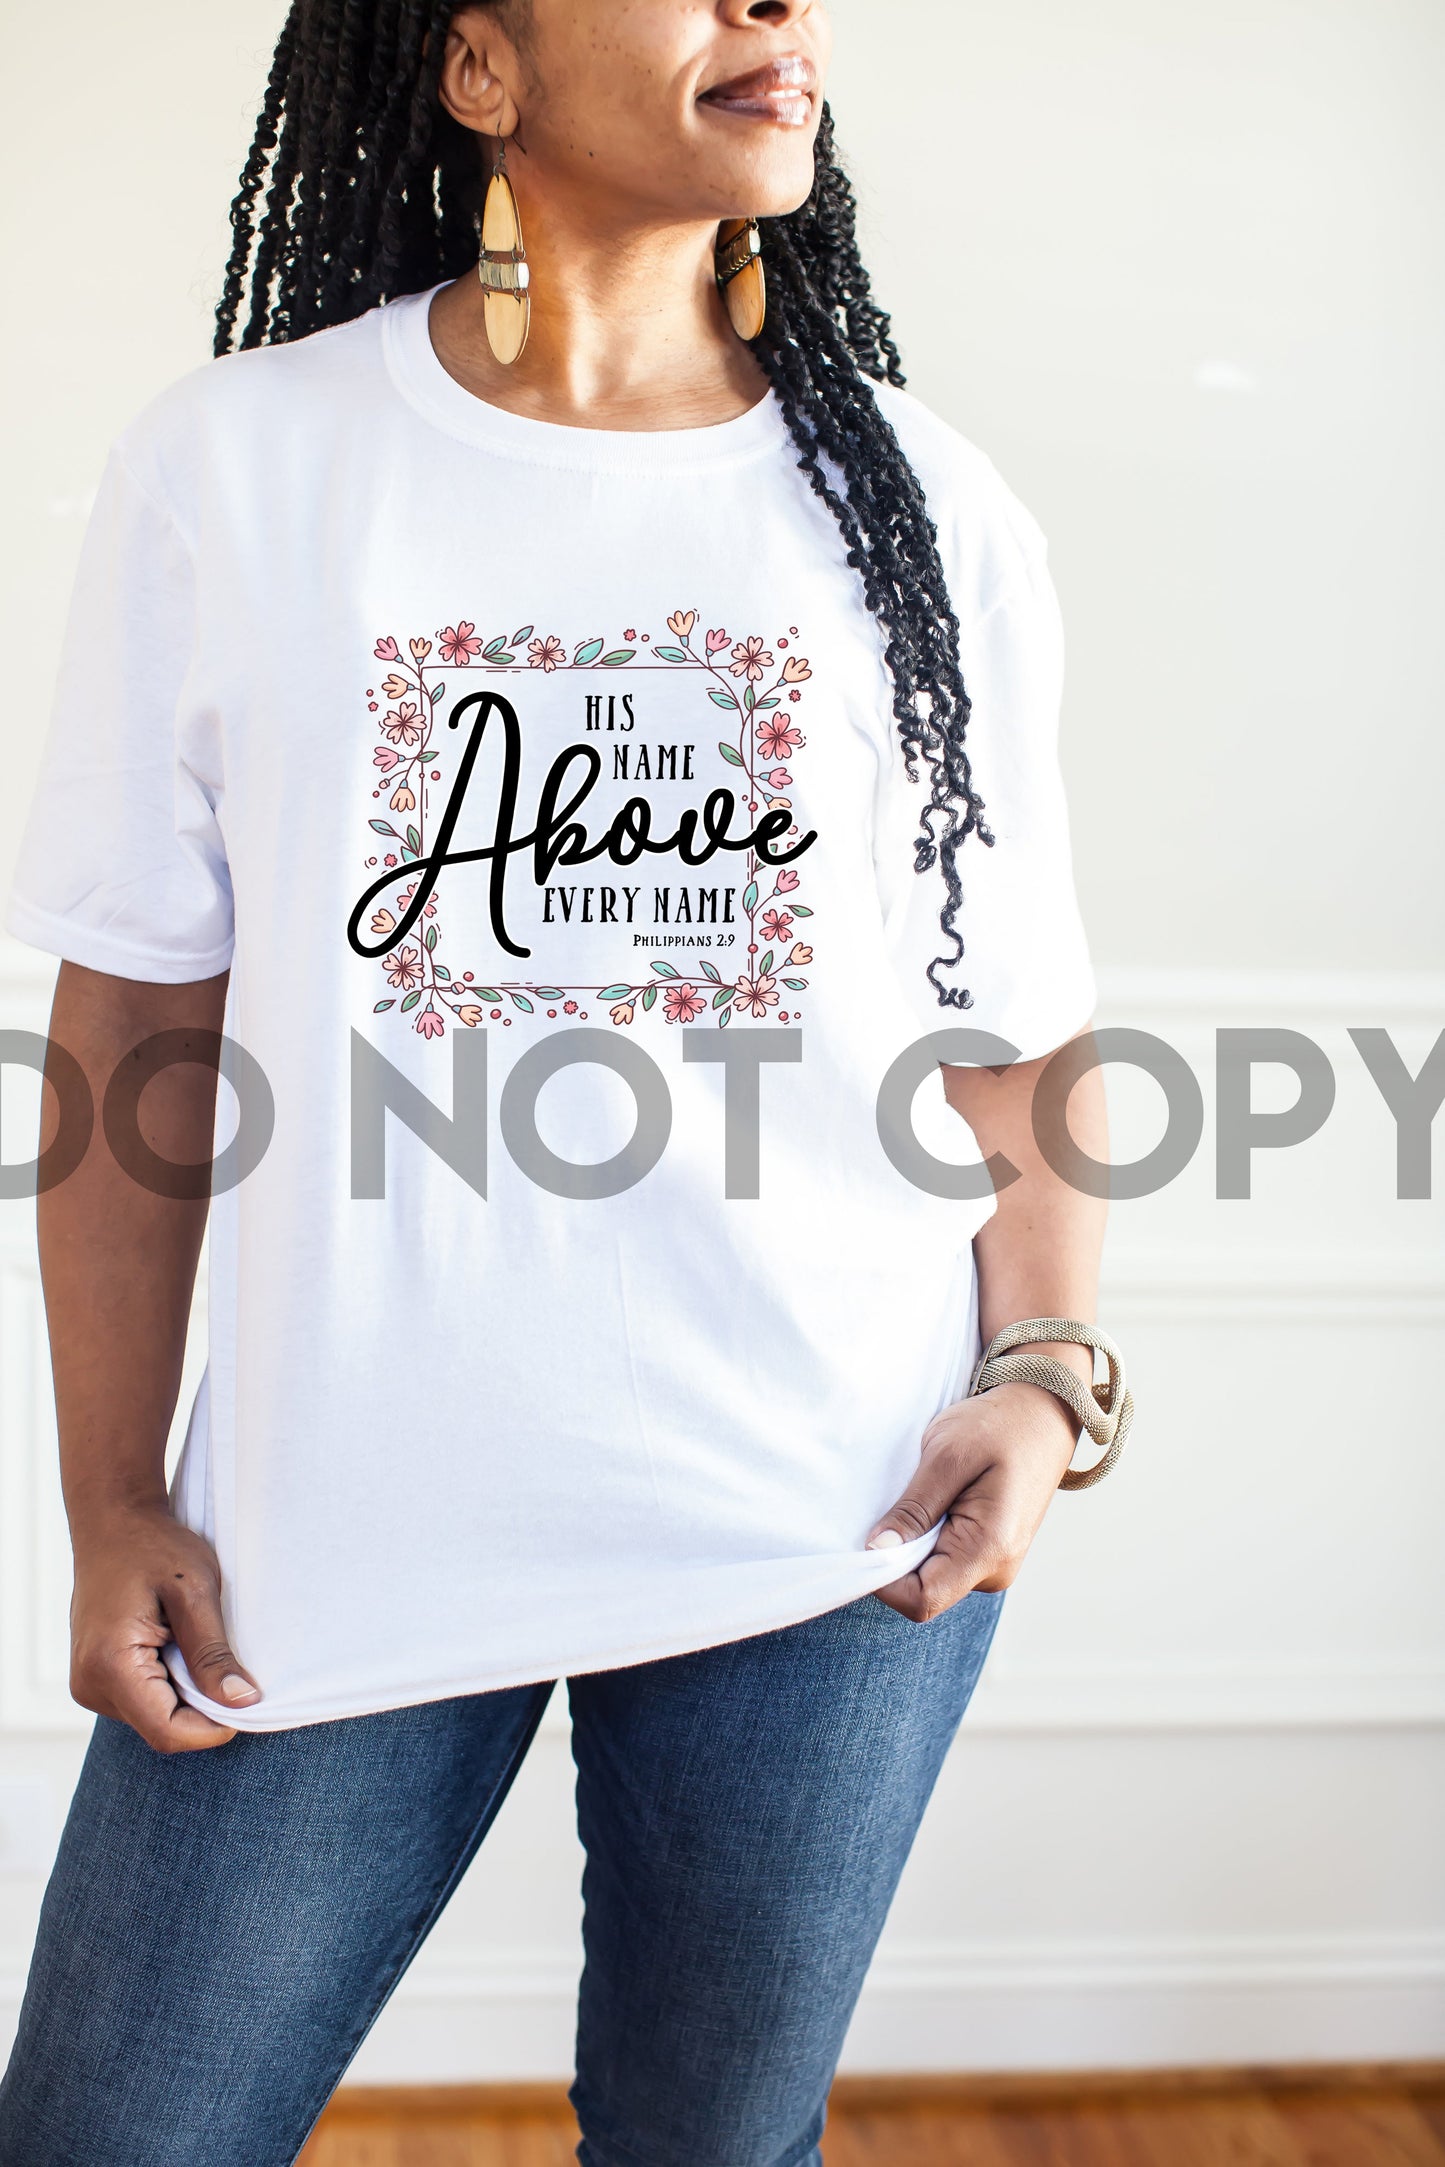 His Name Above Every Name Philippians 2:9 Sublimation print